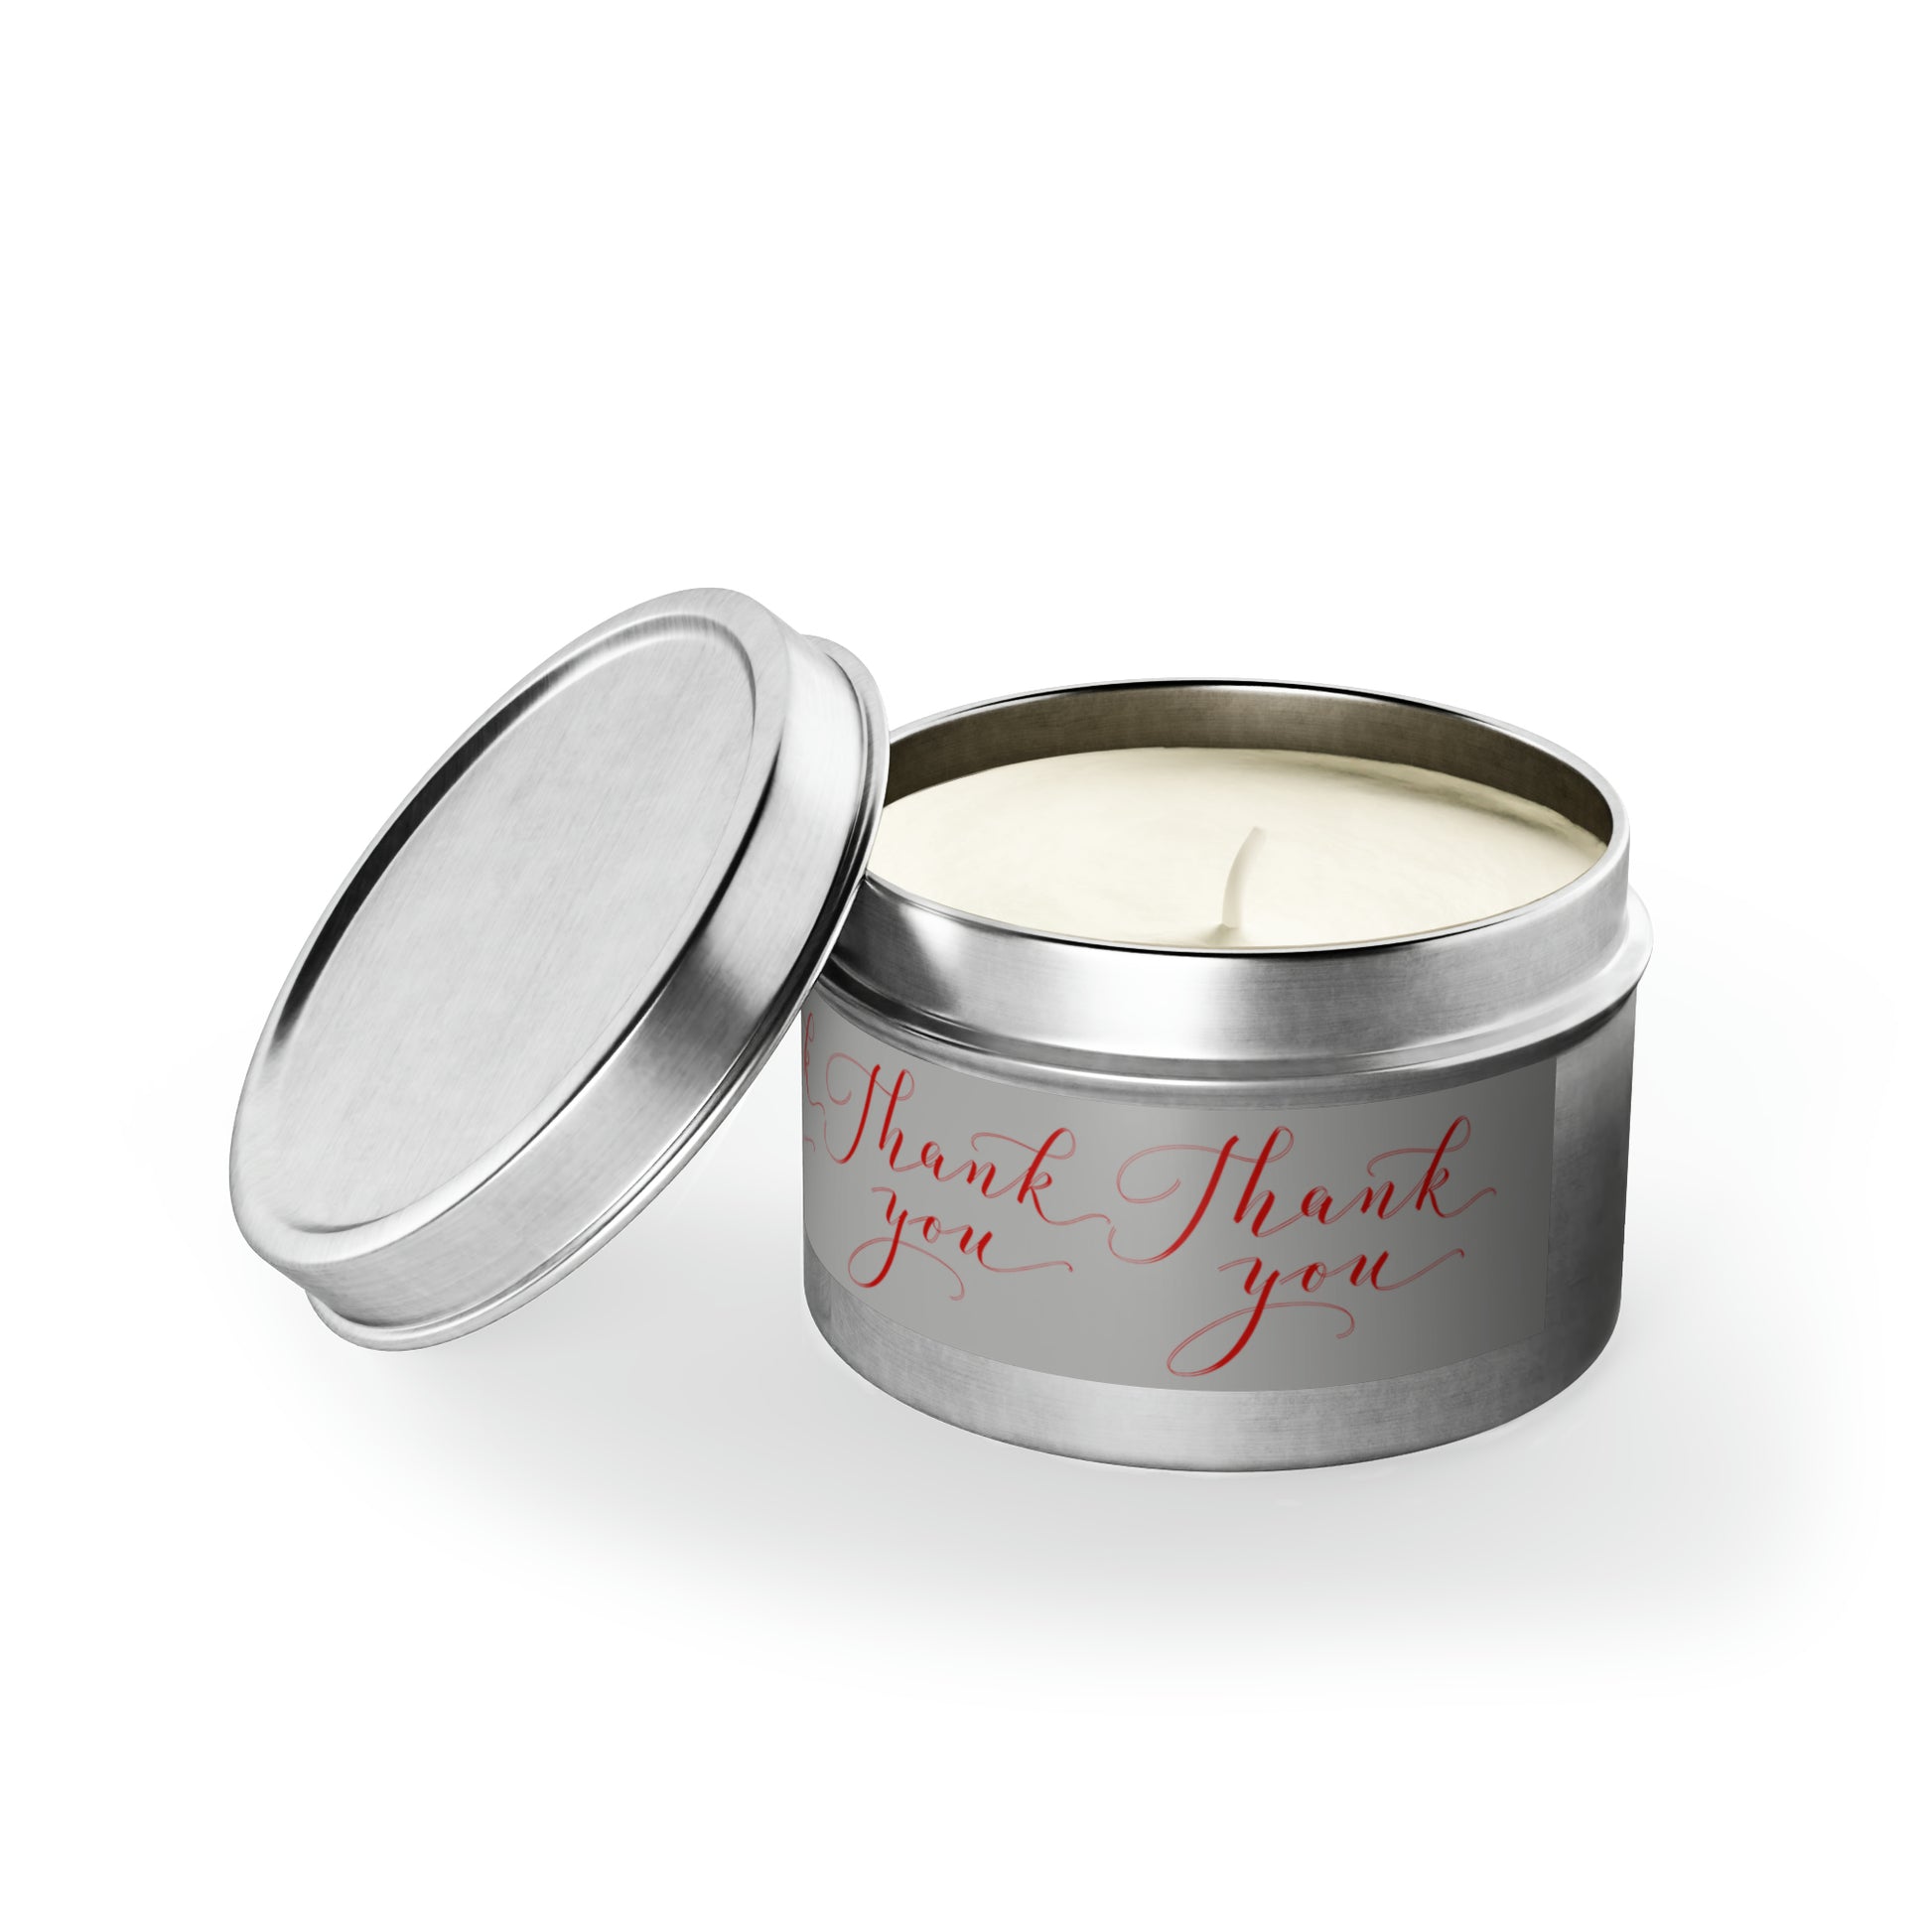 A Printify scented tin candle: 4 oz.; 2 fragrances; Silver; Thank you, made with natural soy wax.